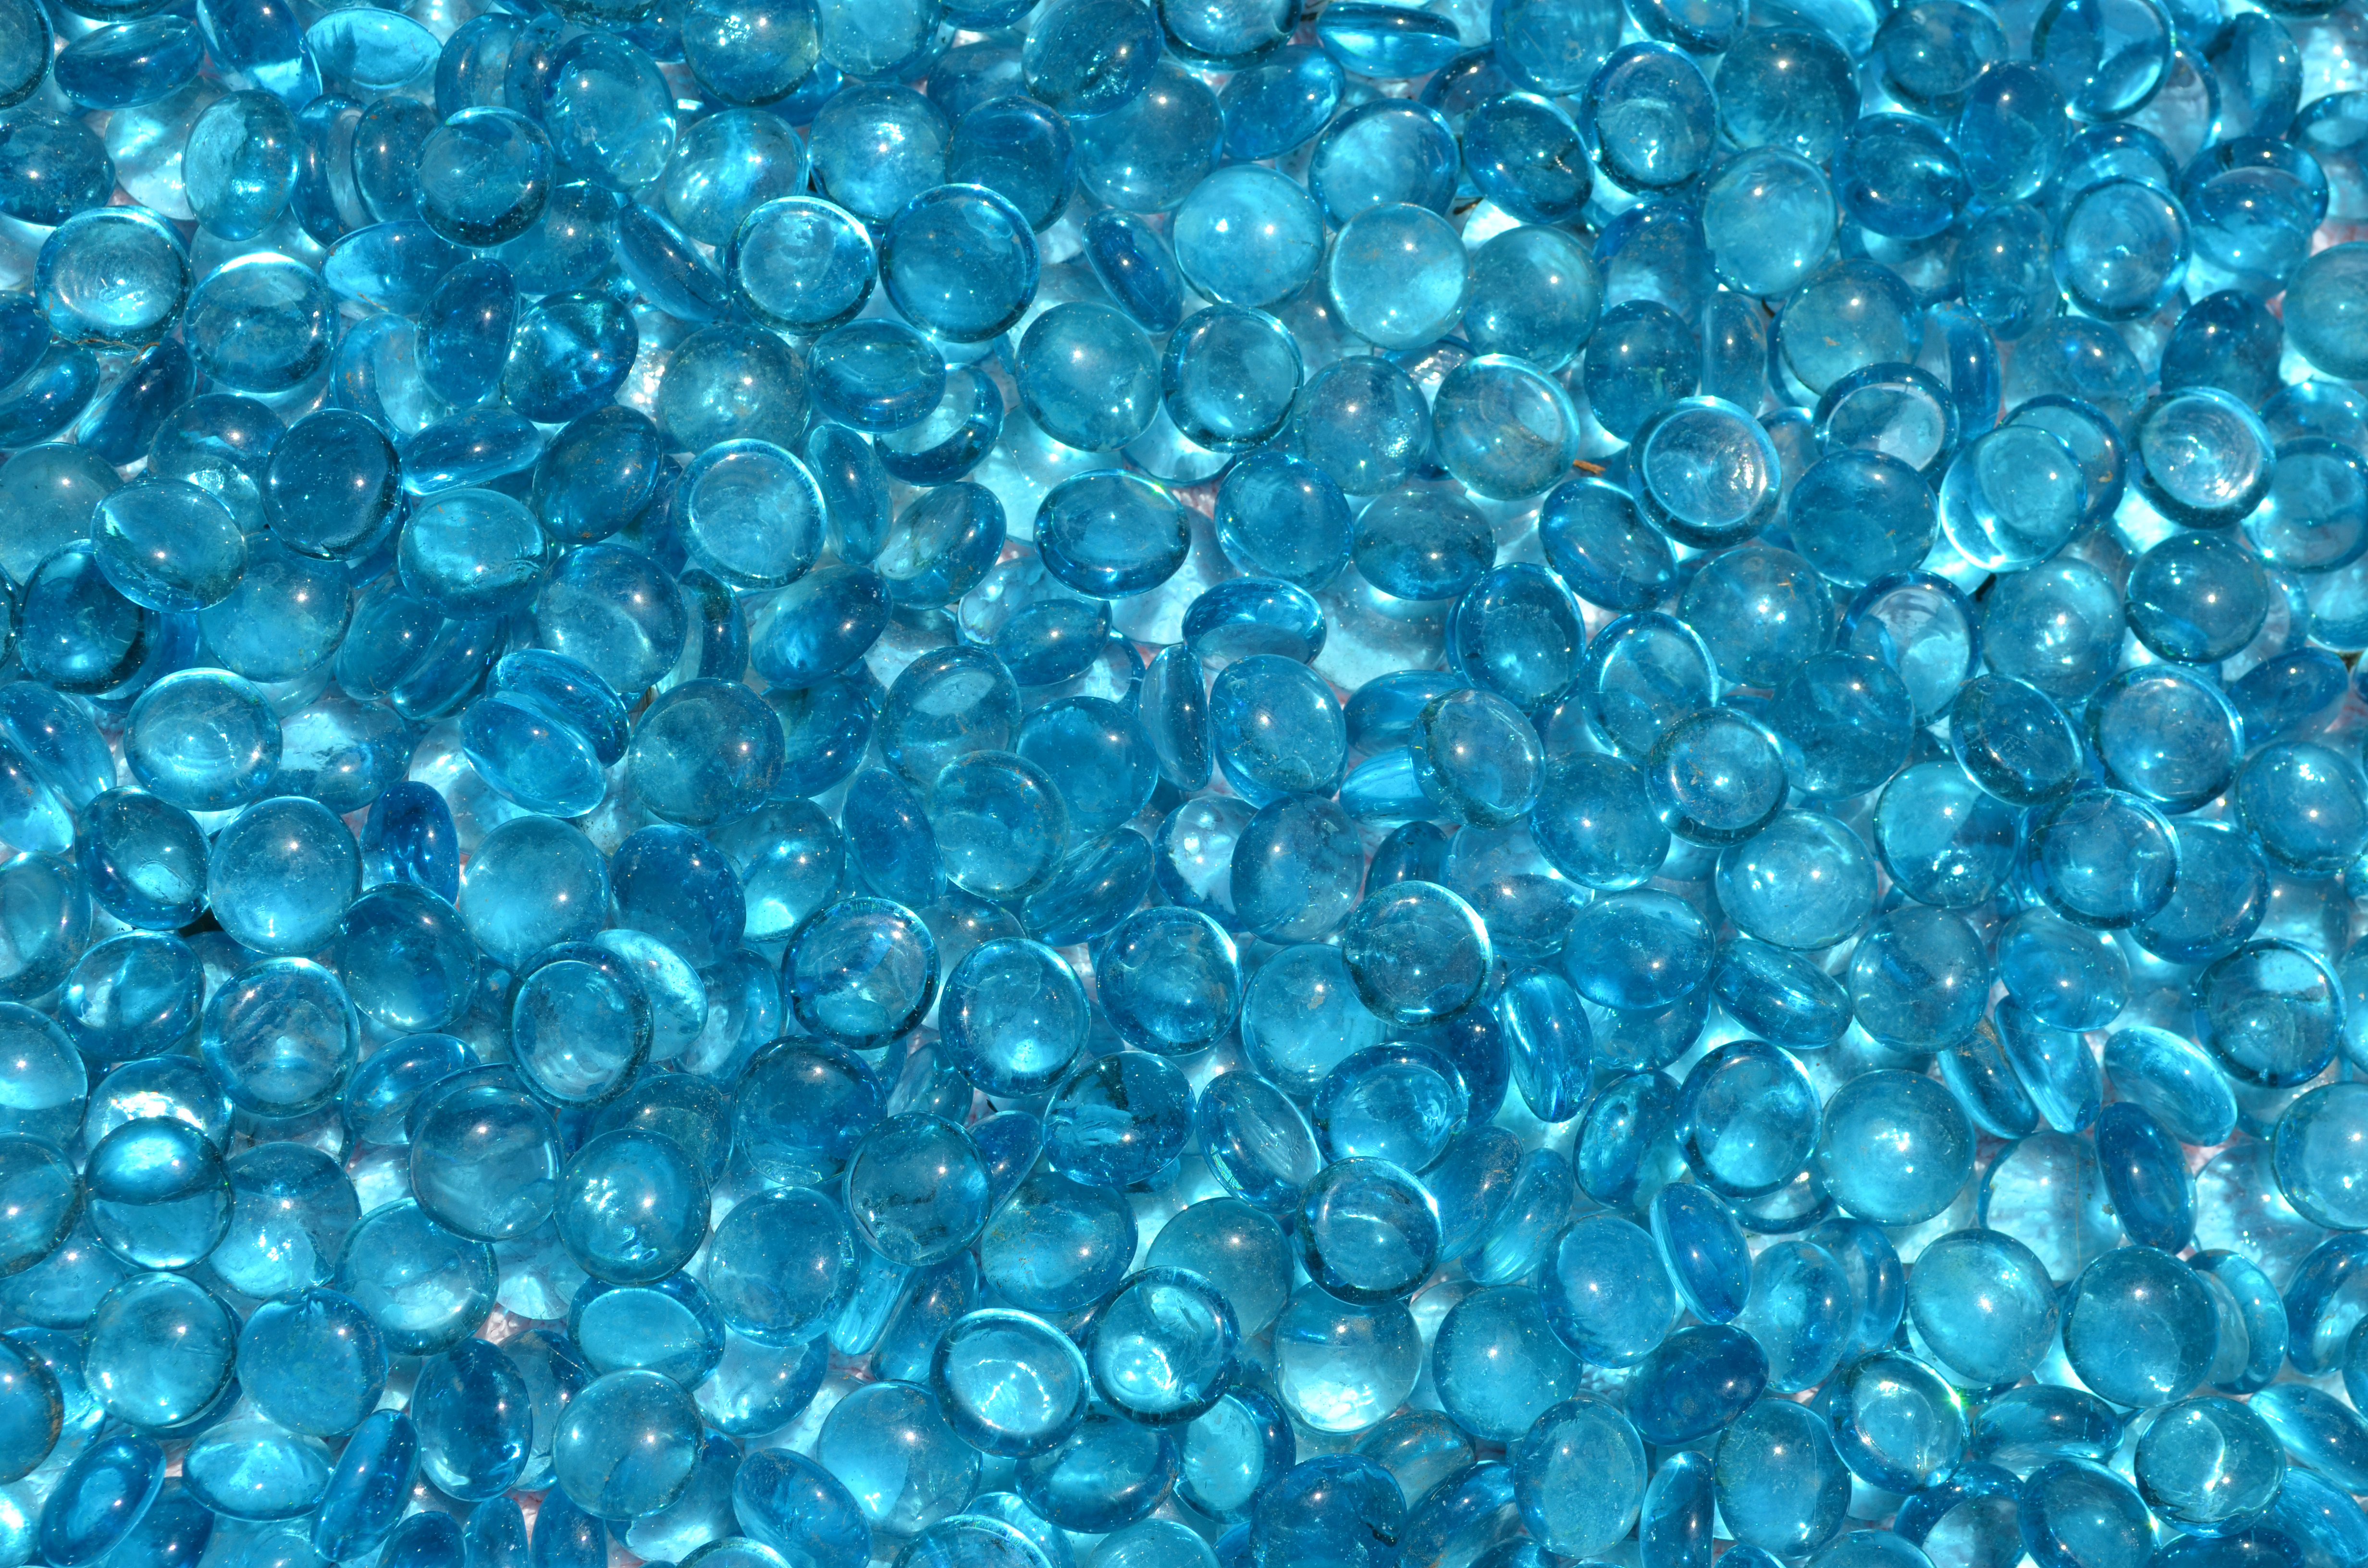 Blue Marbles Texture Stock Photo 0117 by annamae22 on DeviantArt